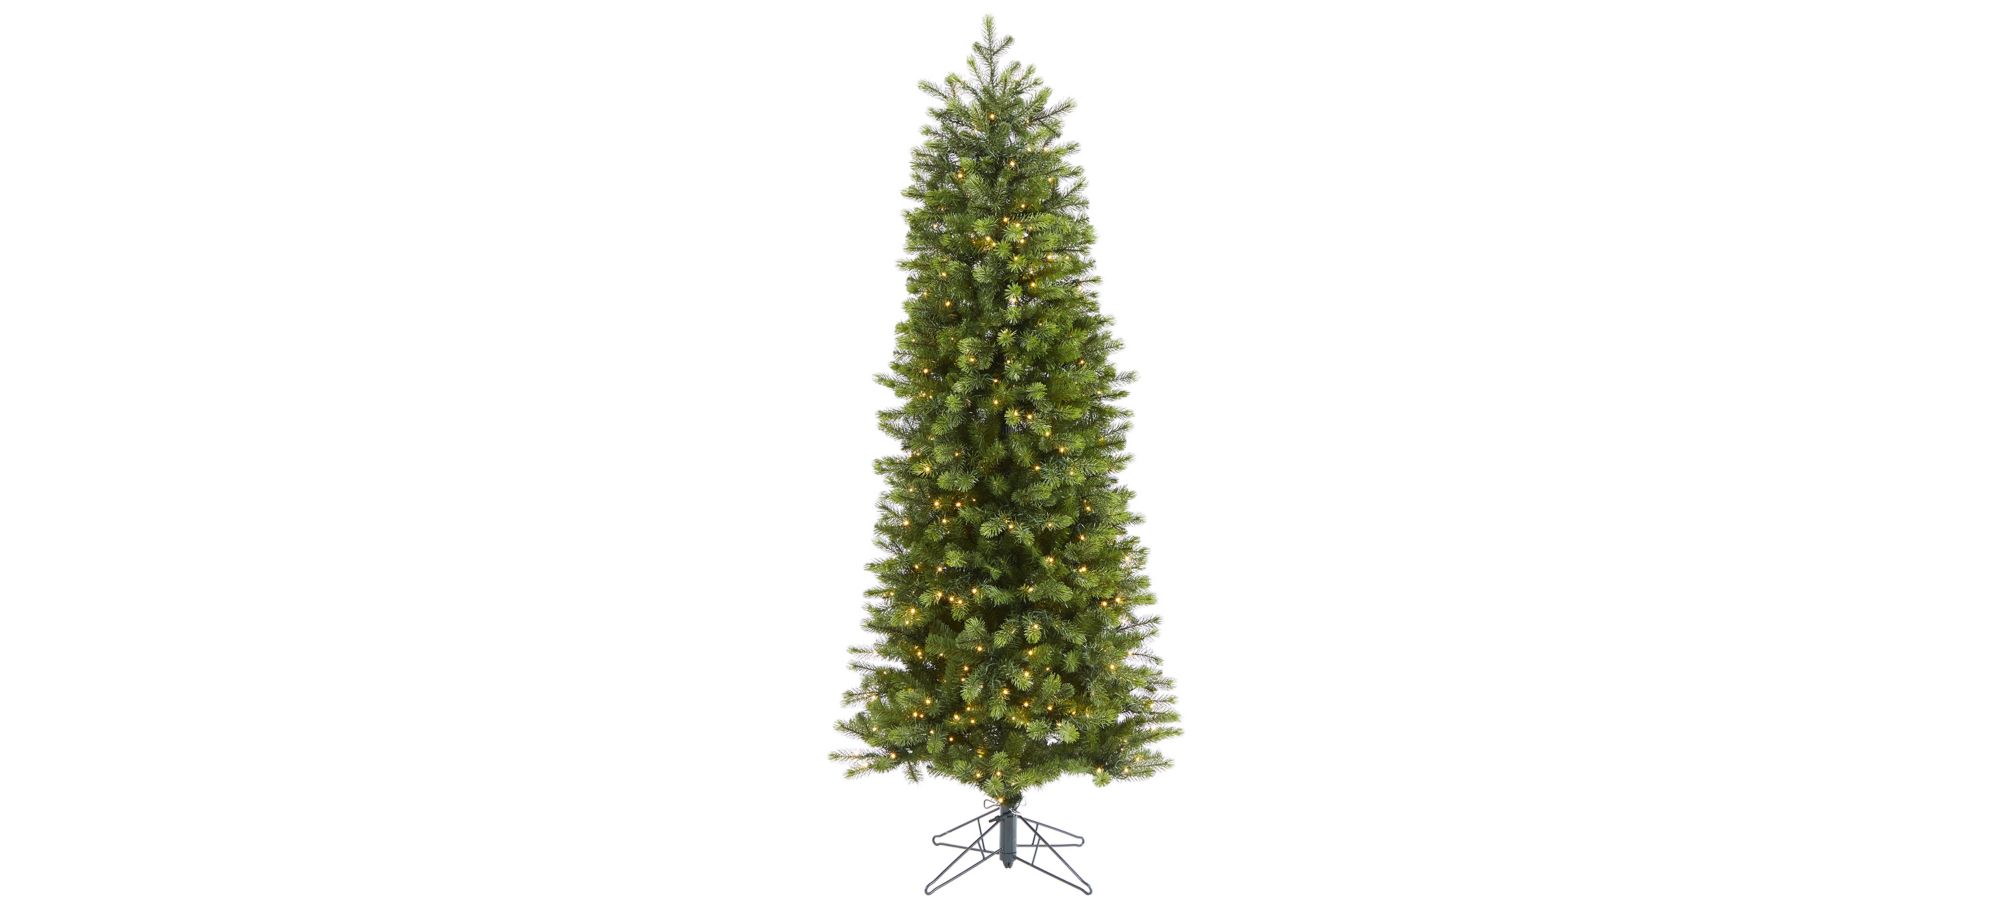 6.5ft. Pre-Lit Slim Colorado Mountain Spruce Artificial Christmas Tree in Green by Bellanest